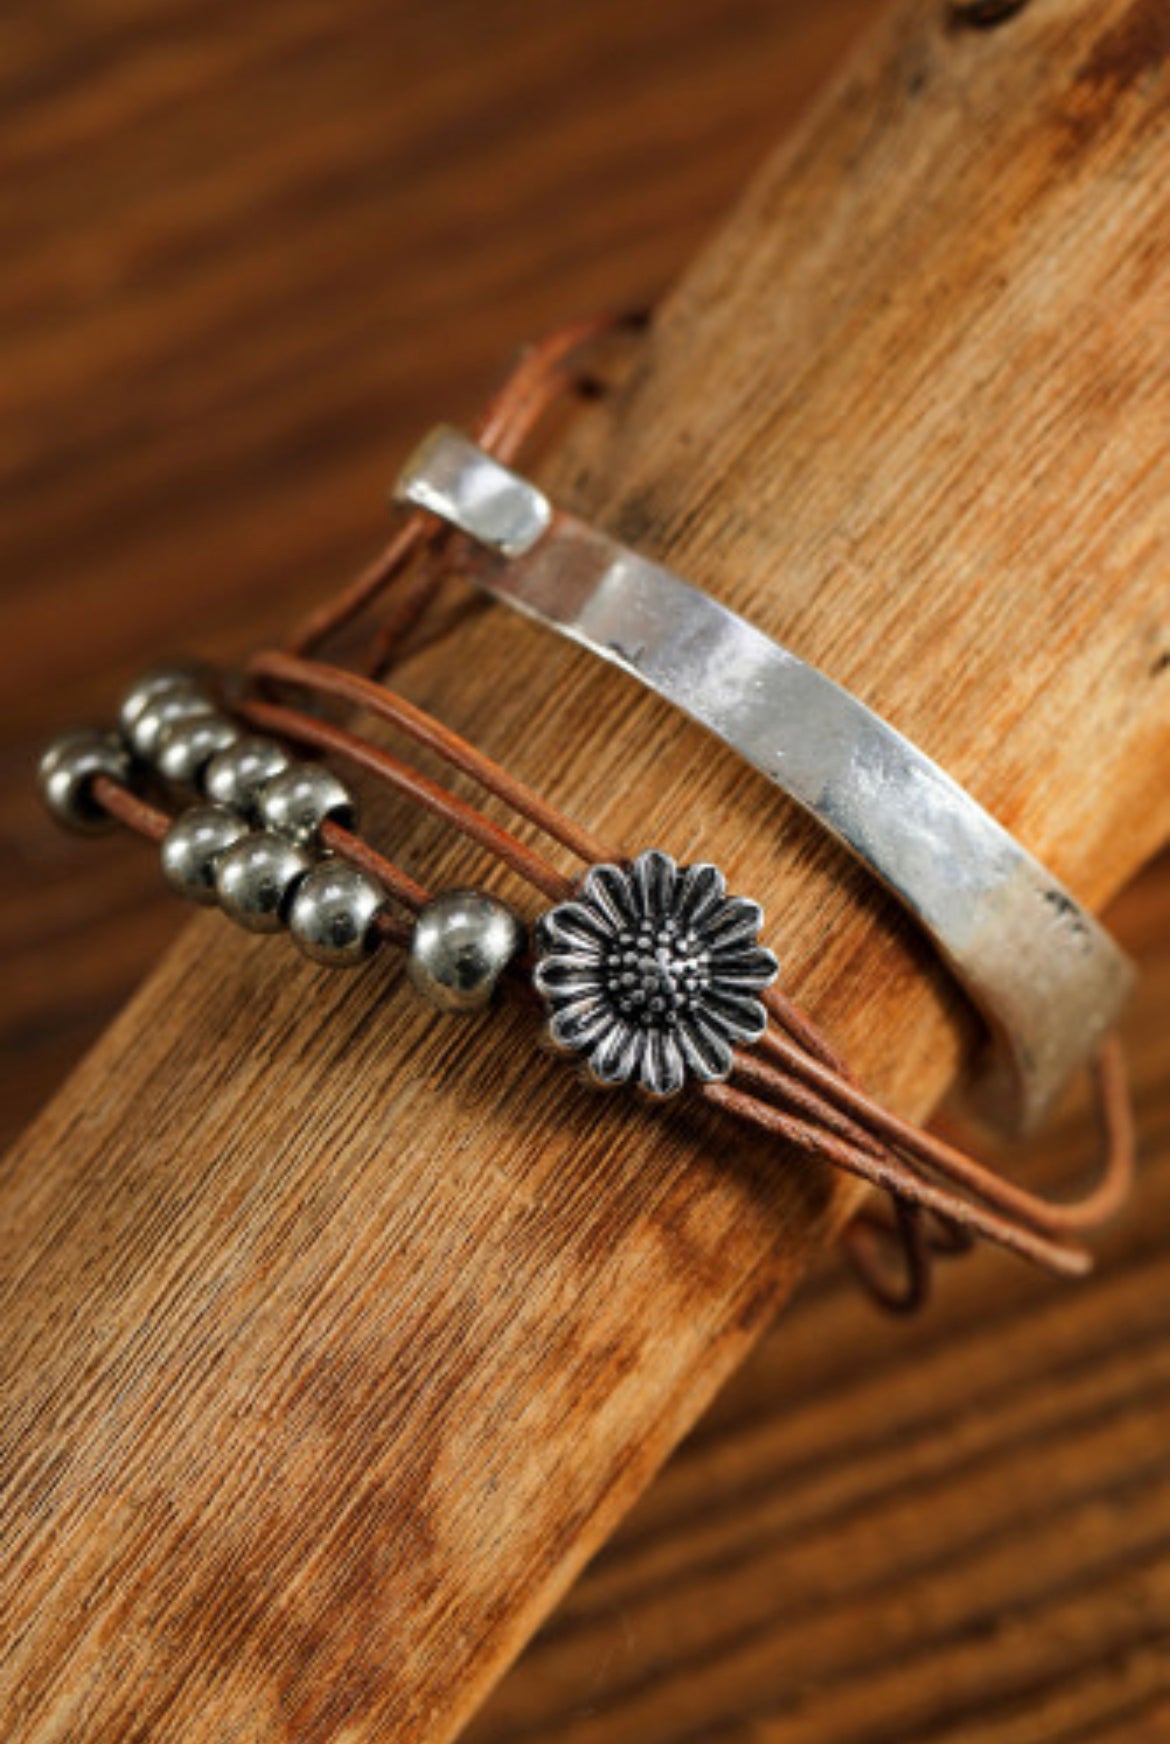 Sunflower Leather wrap and metal cuff-Western Culture Leather